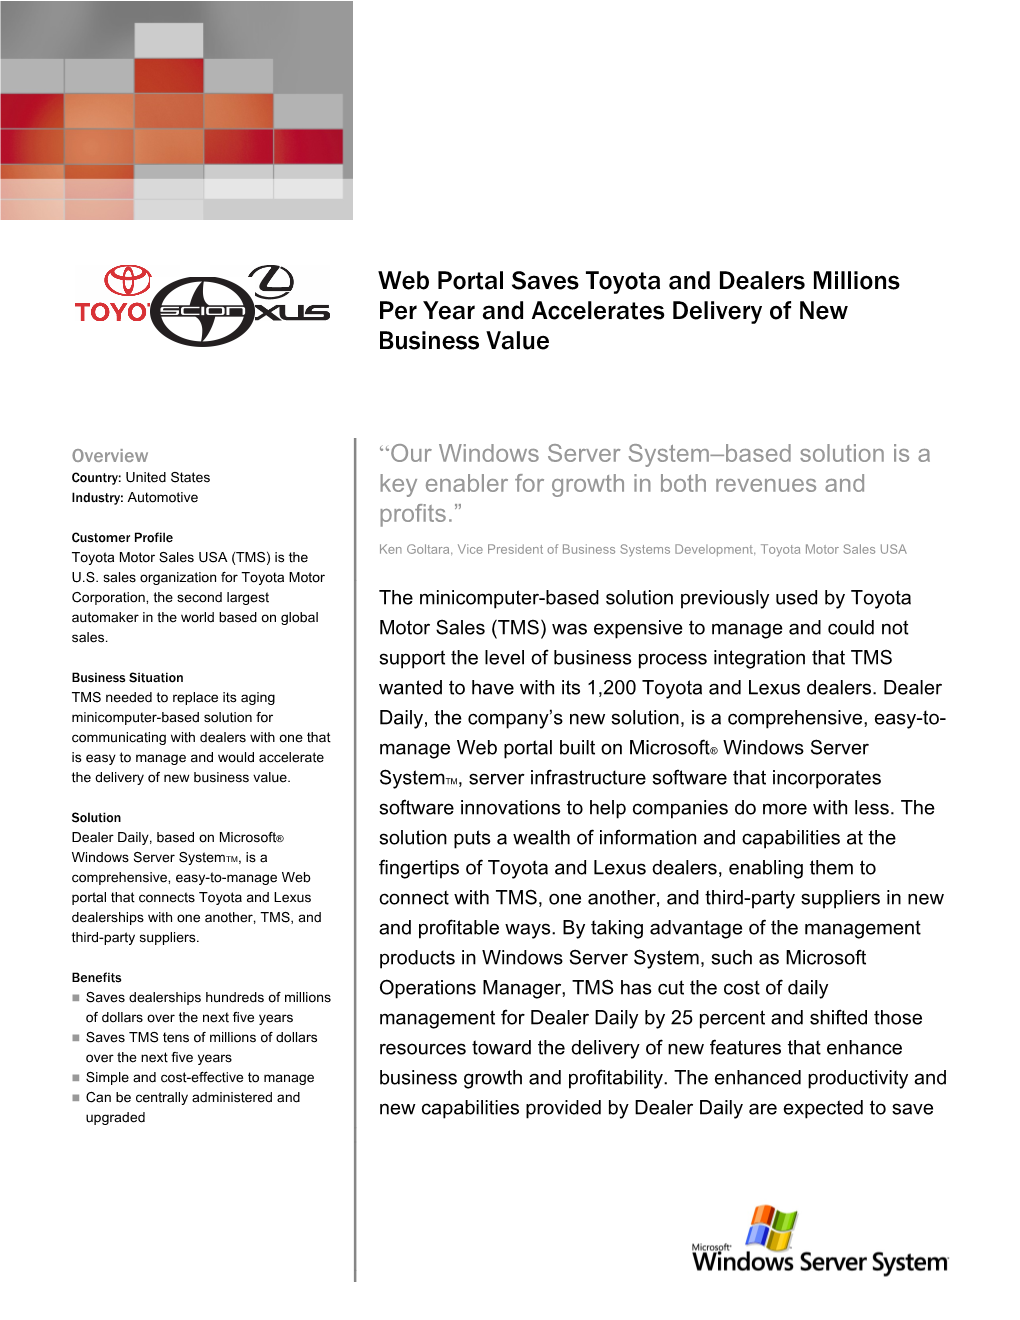 Writeimage CEP Web Portal Saves Toyota and Dealers Millions Per Year and Accelerates Delivery